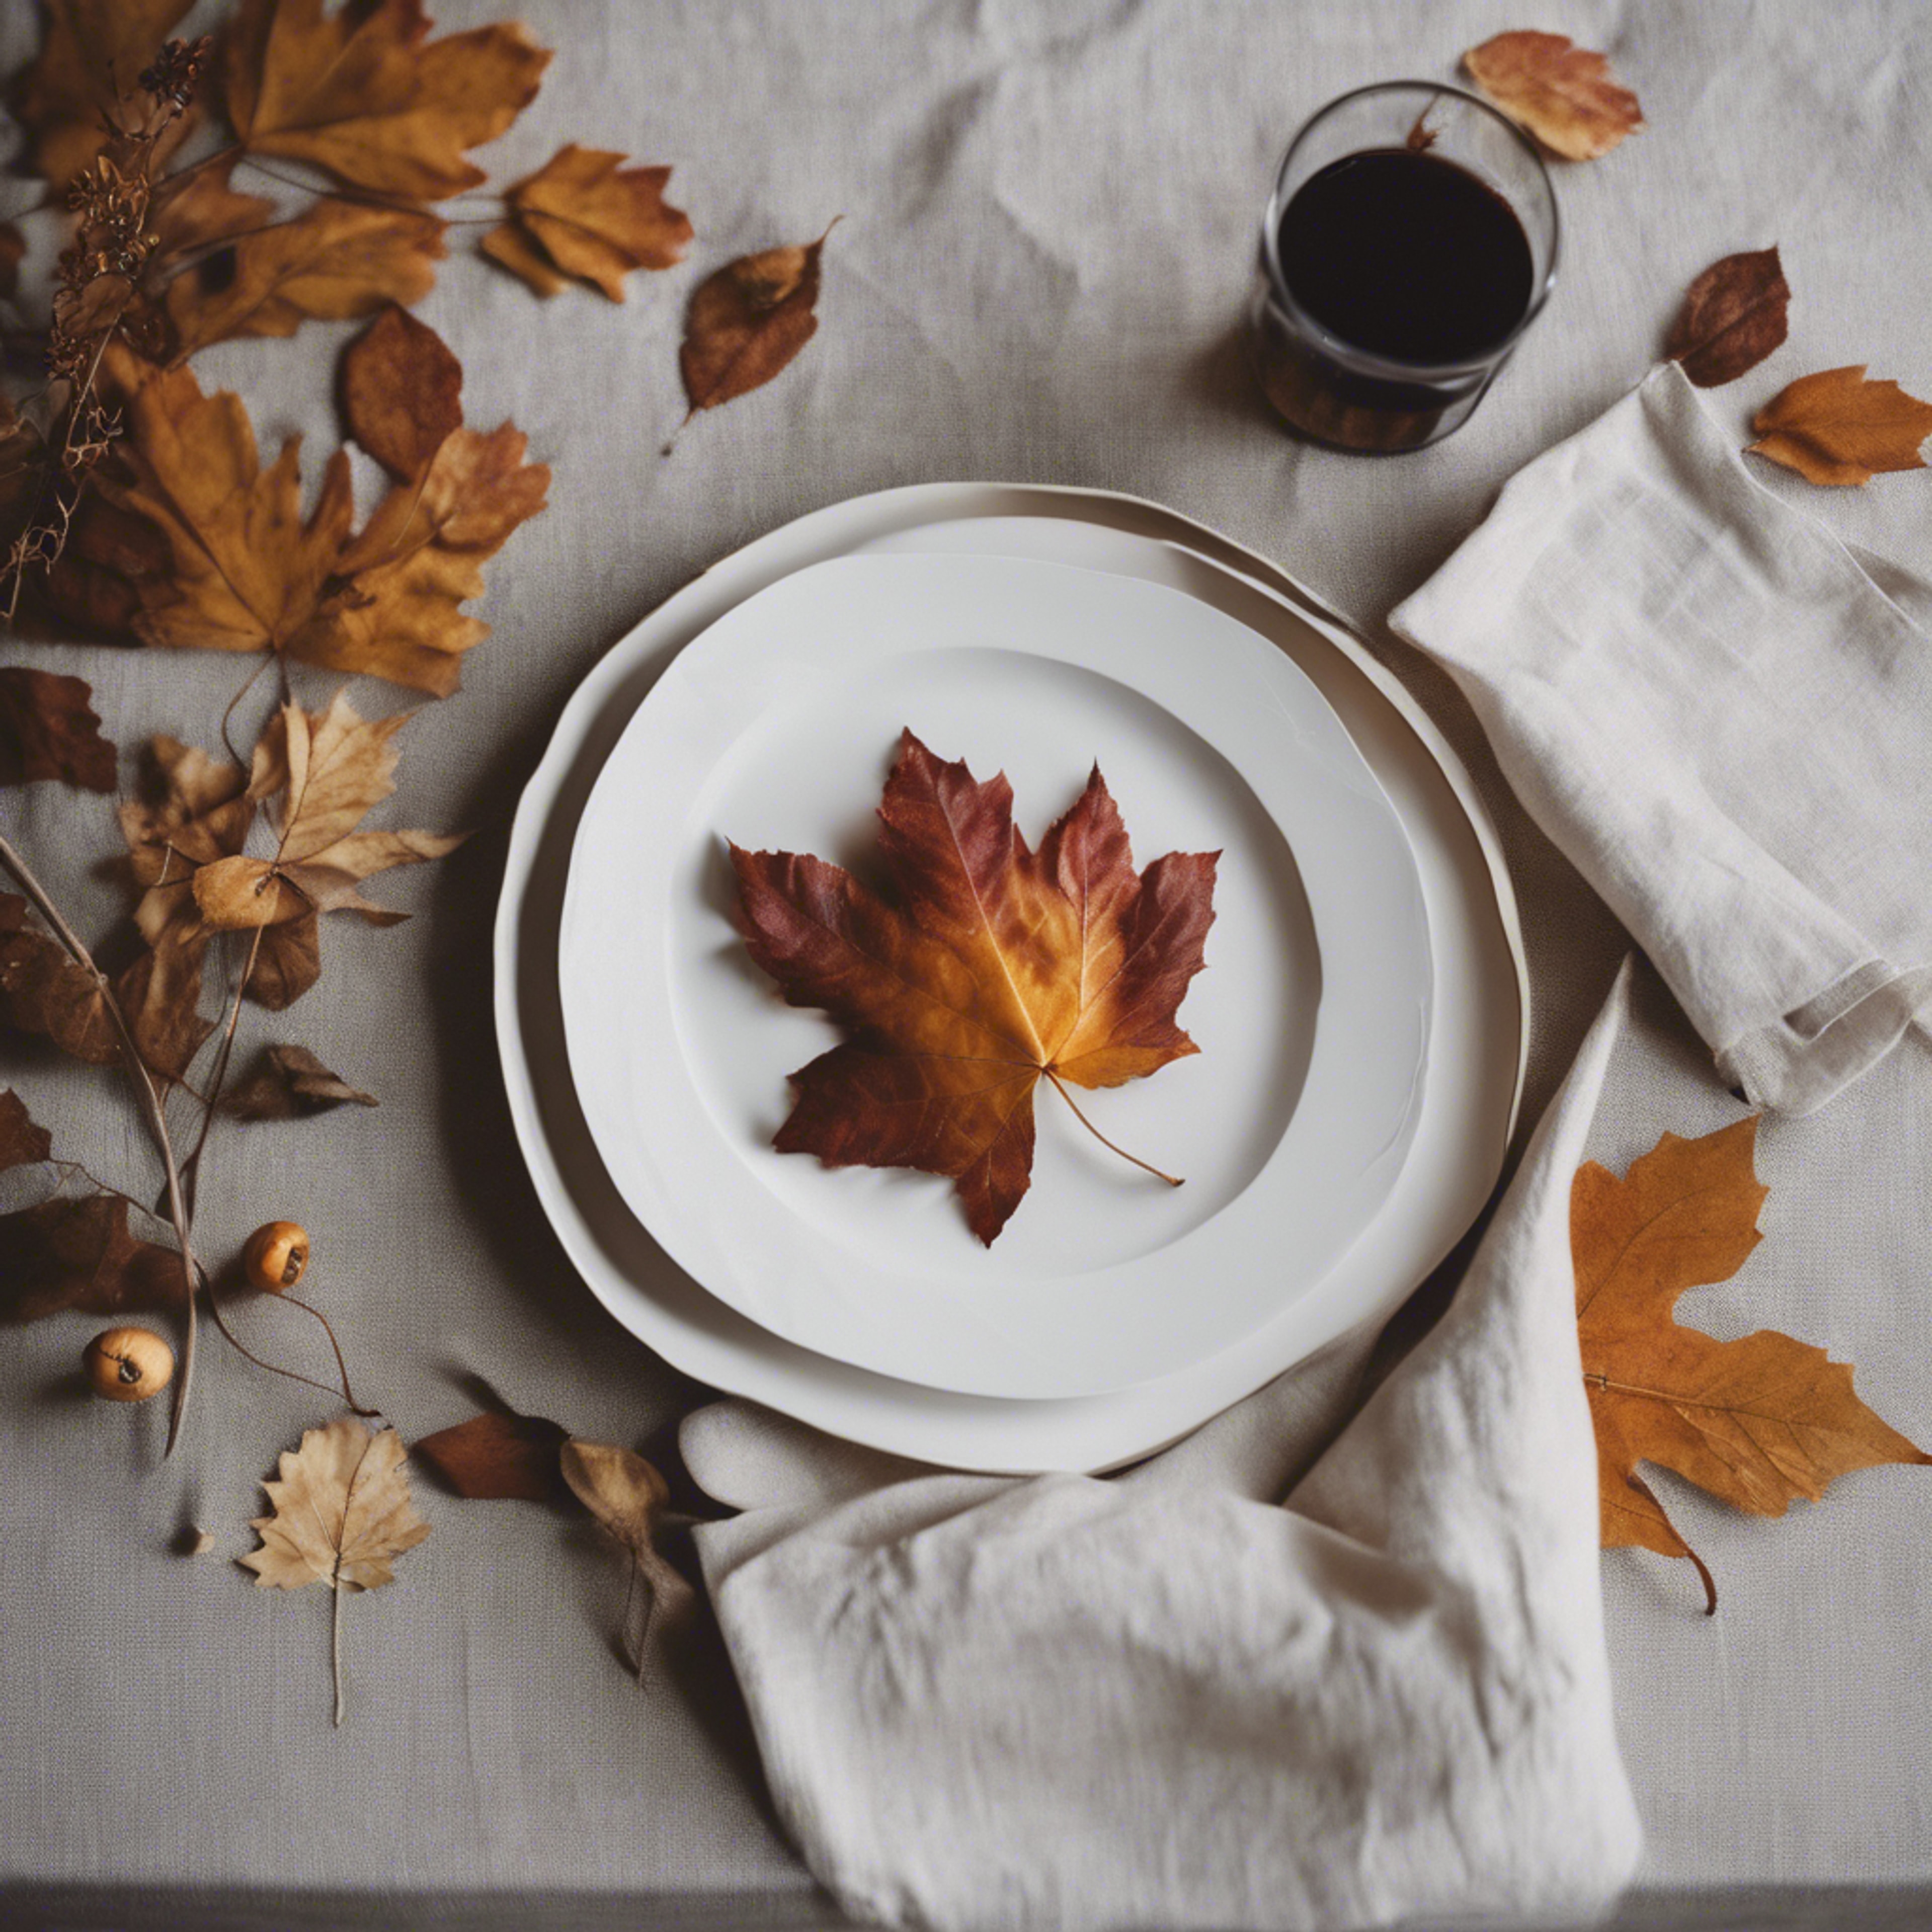 Simplicity-lover's Thanksgiving table decor with minimalistic white plates, natural linen napkins, and a few scattered autumn leaves. ផ្ទាំង​រូបភាព[4fdd30c95e164a8e8309]